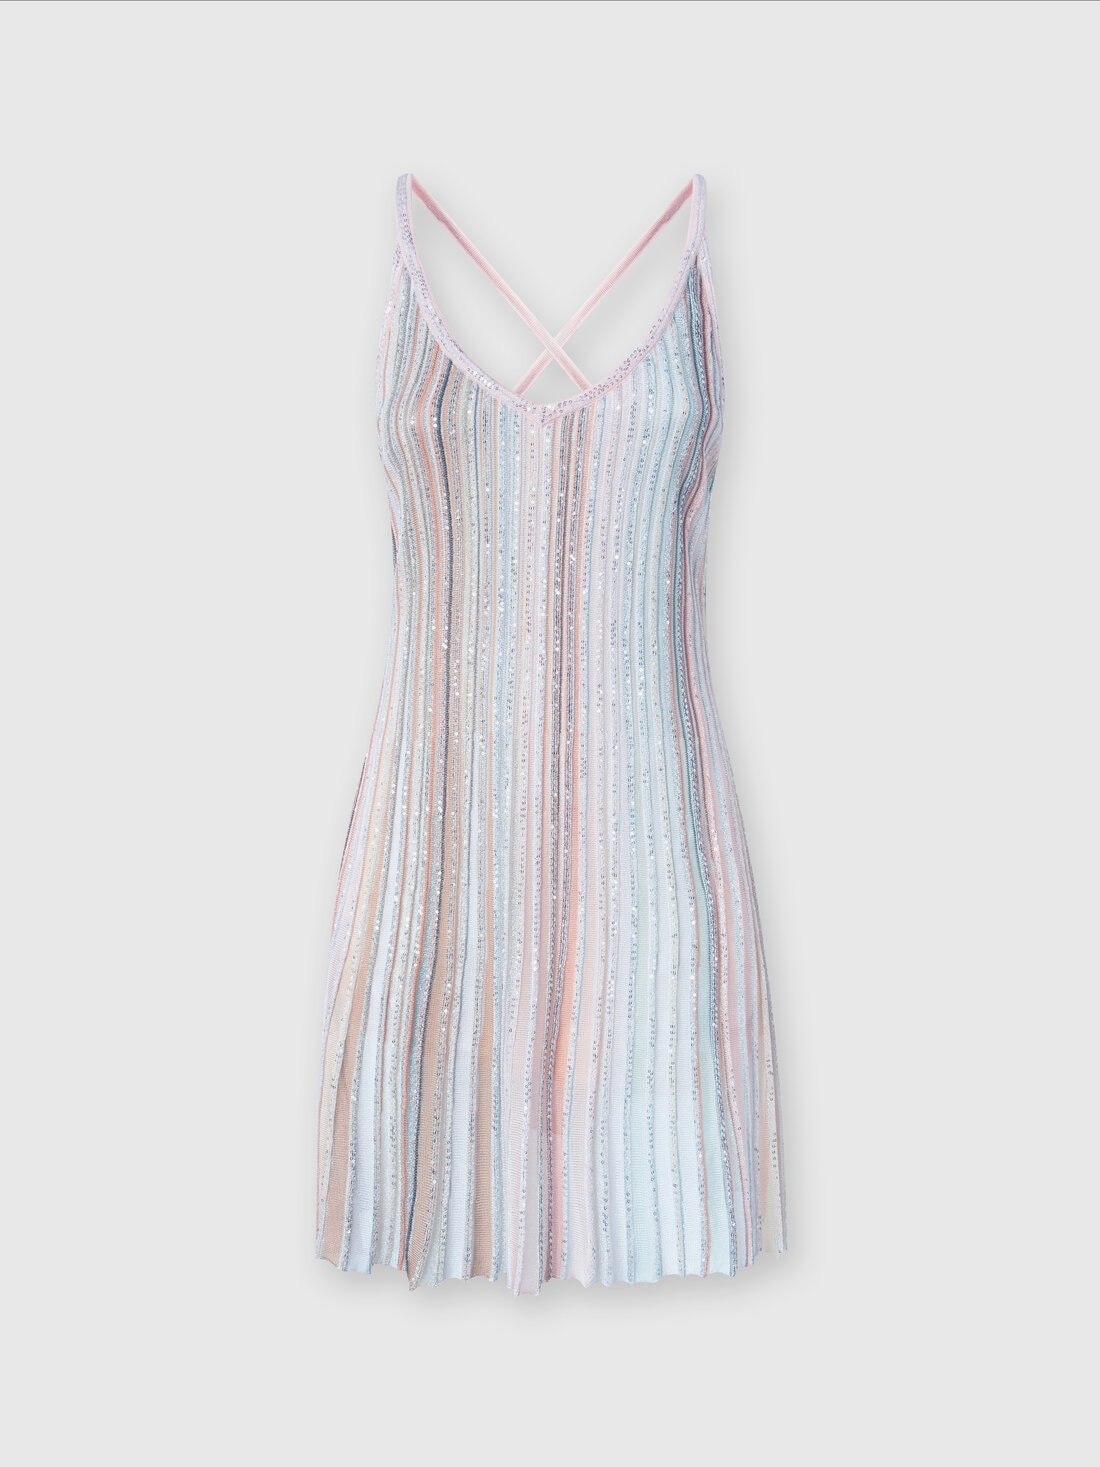 Minidress in vertical striped knit with sequins, Multicoloured  - DS24SG13BK033MSM9AH - 0